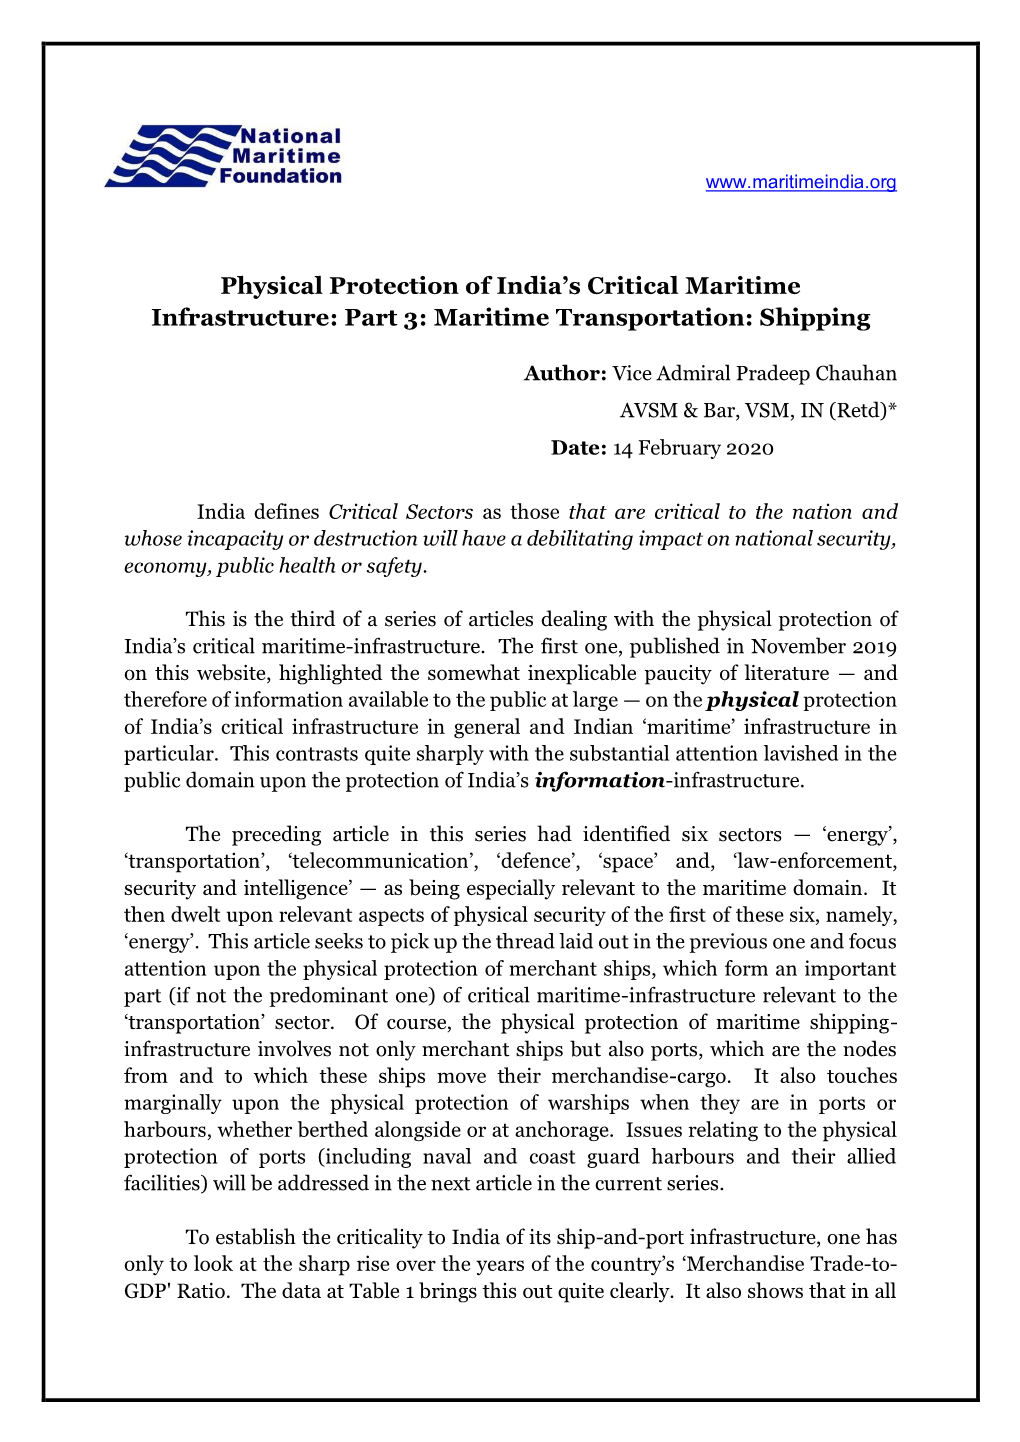 Physical Protection of India's Critical